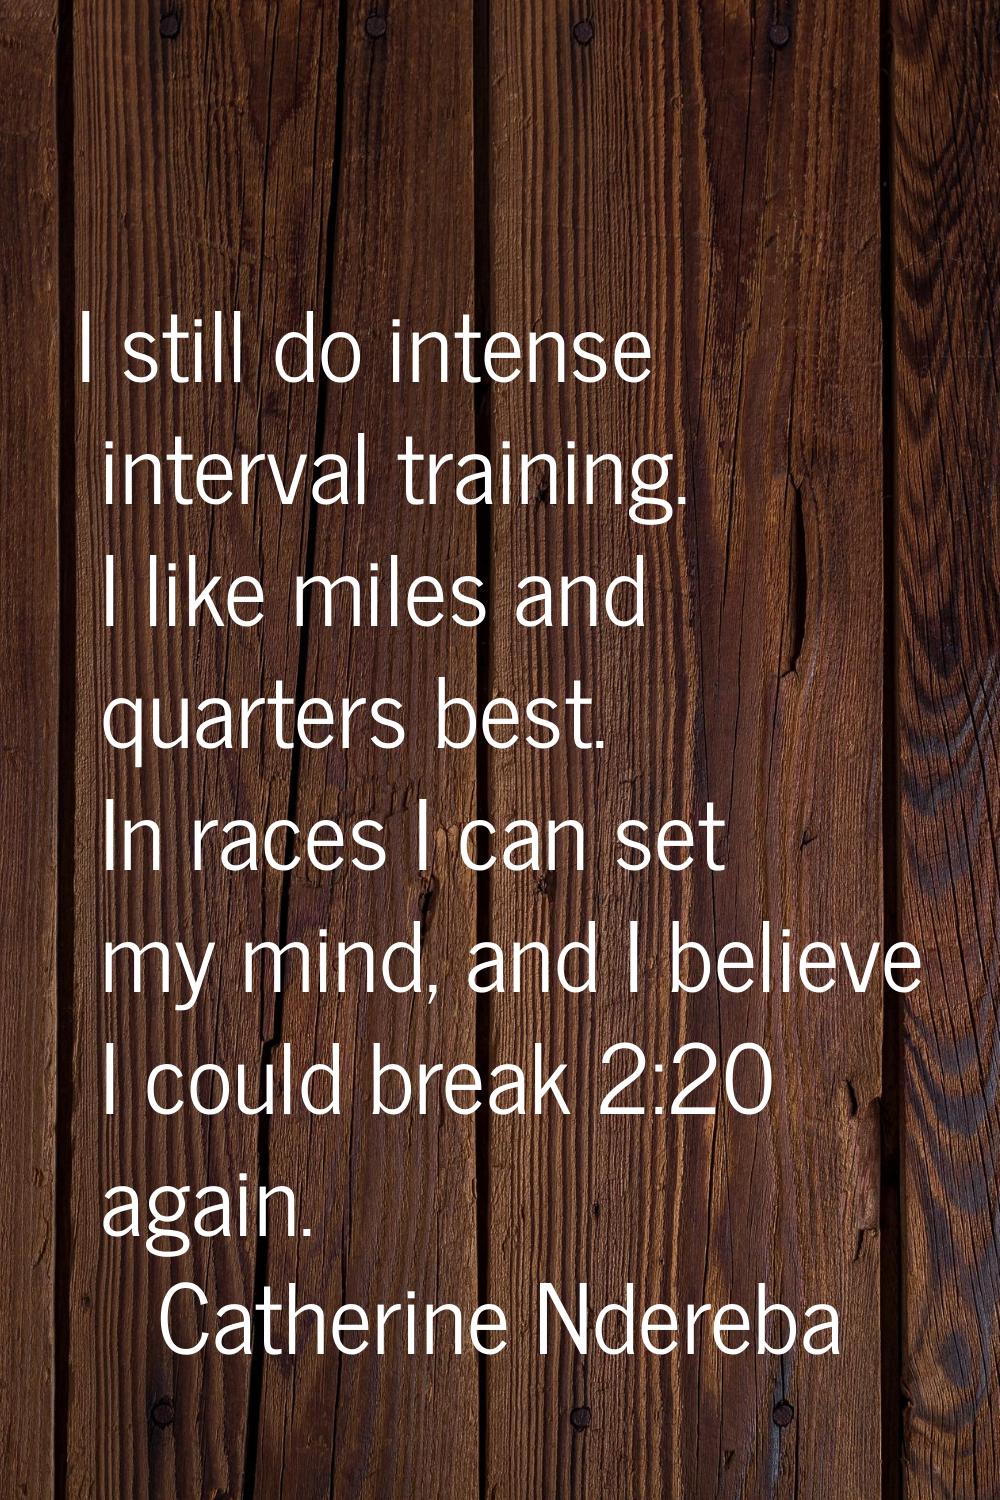 I still do intense interval training. I like miles and quarters best. In races I can set my mind, a